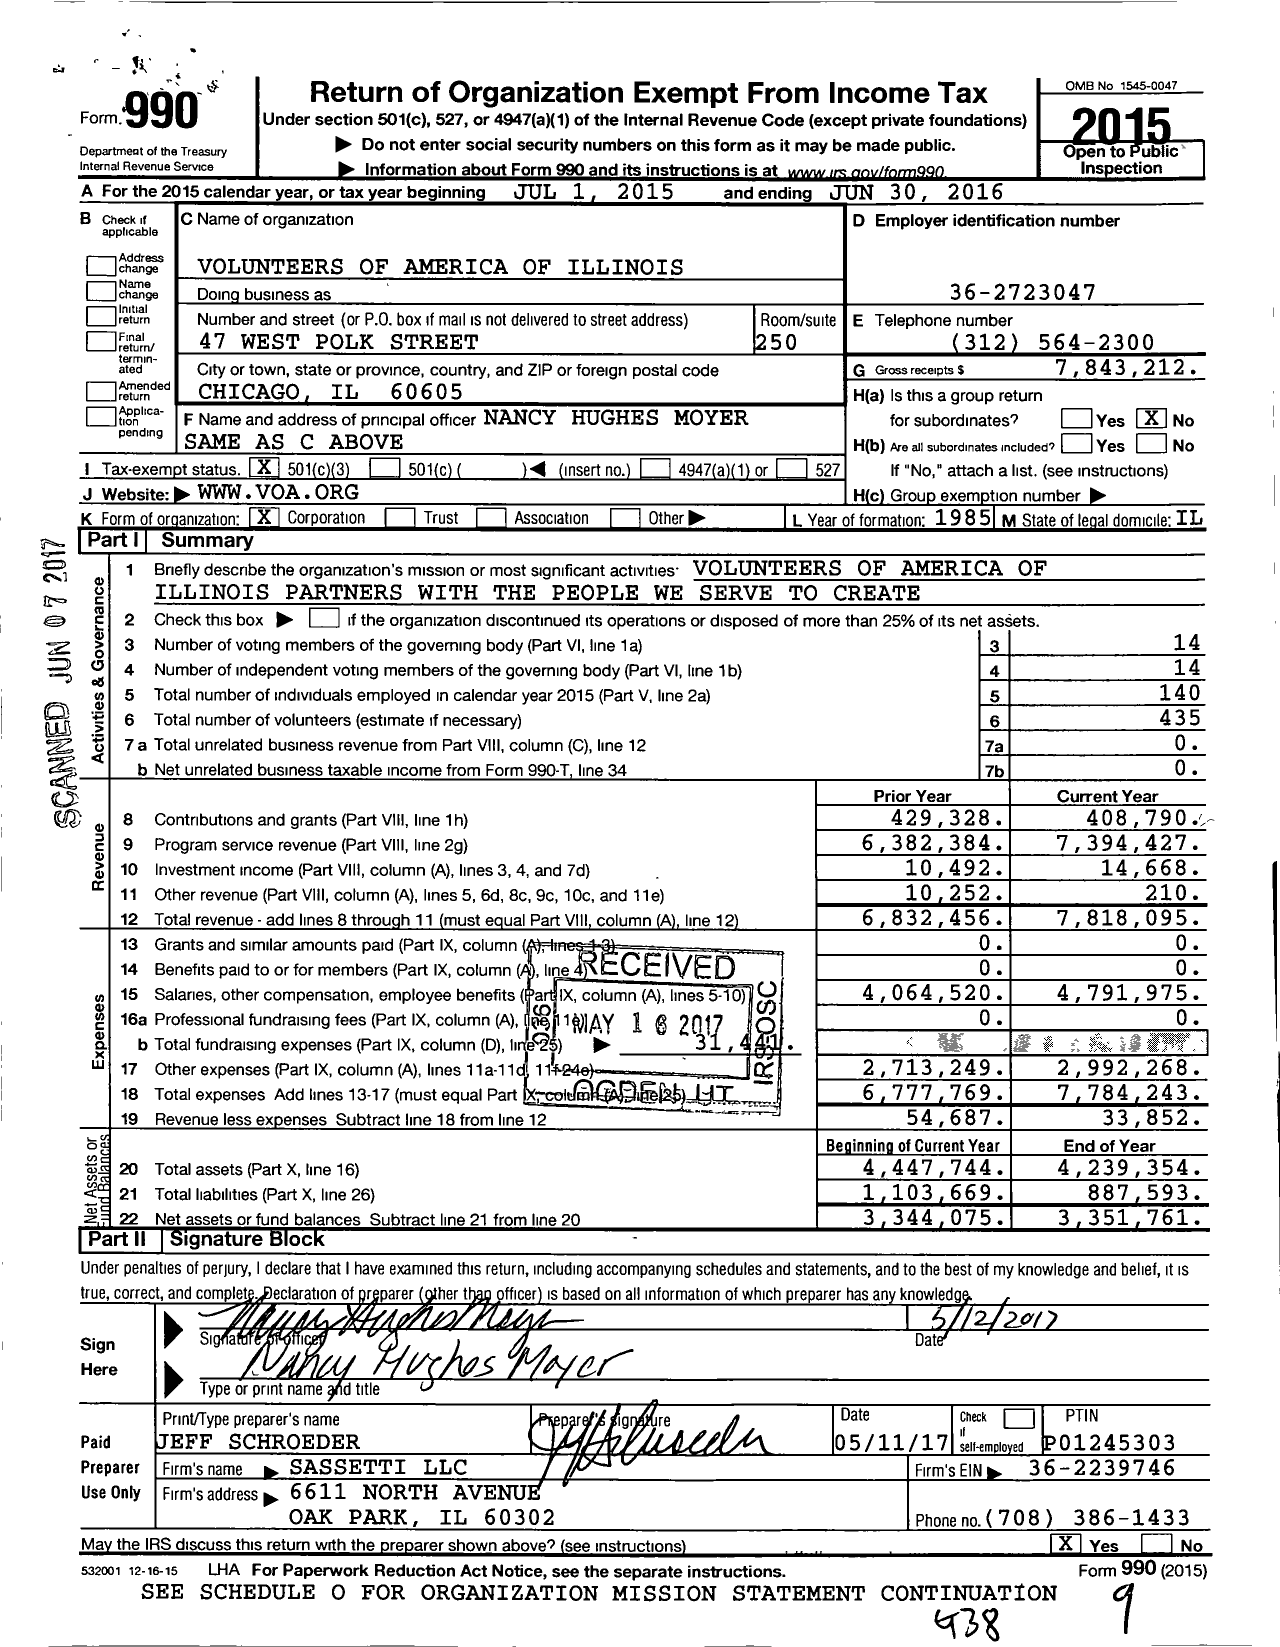 Image of first page of 2015 Form 990 for Volunteers of America of Illinois (VOA of IL)